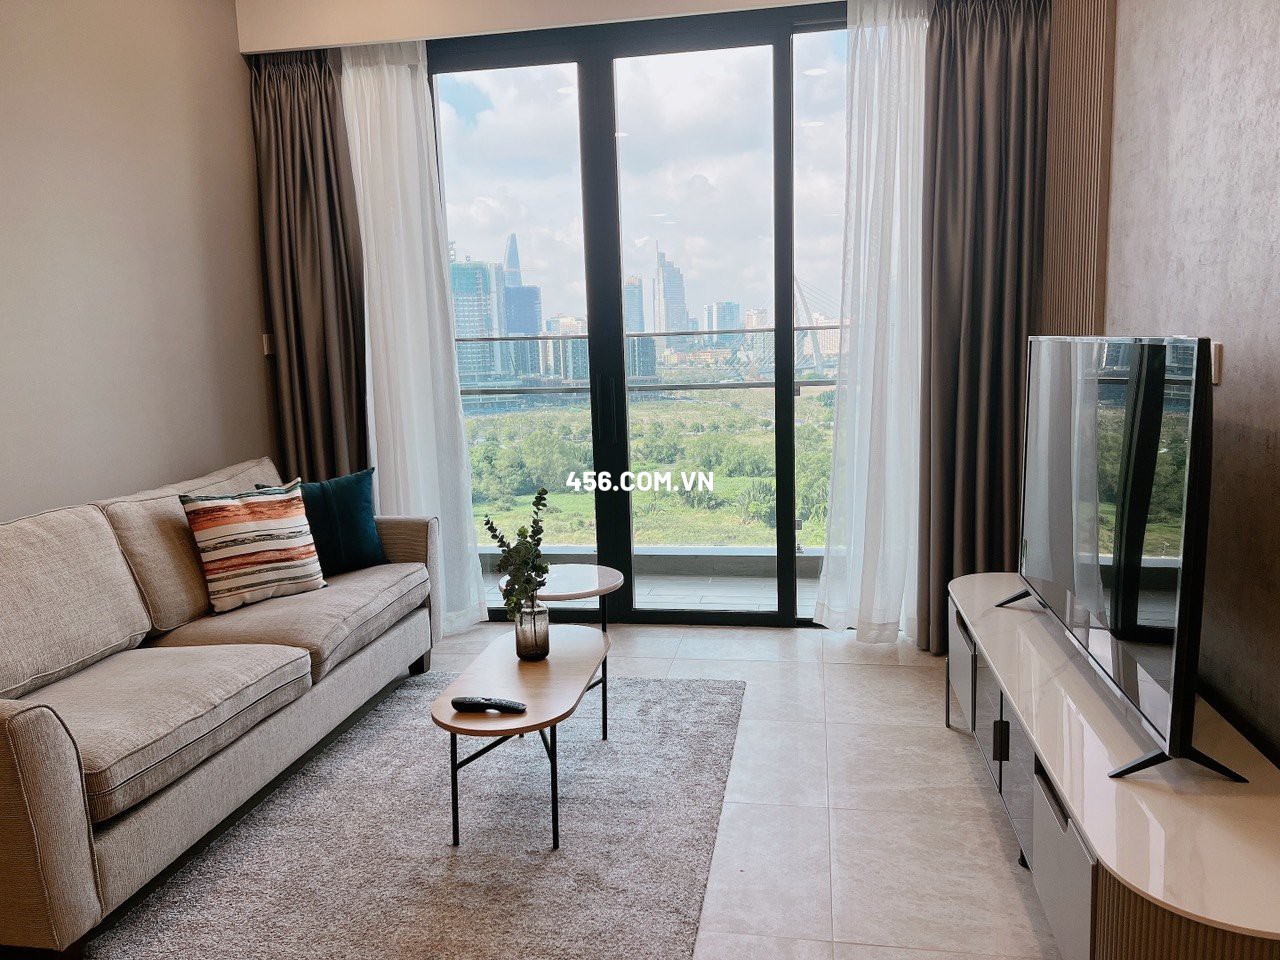 1 Bedrooms The River Thu Thiem Apartment For...